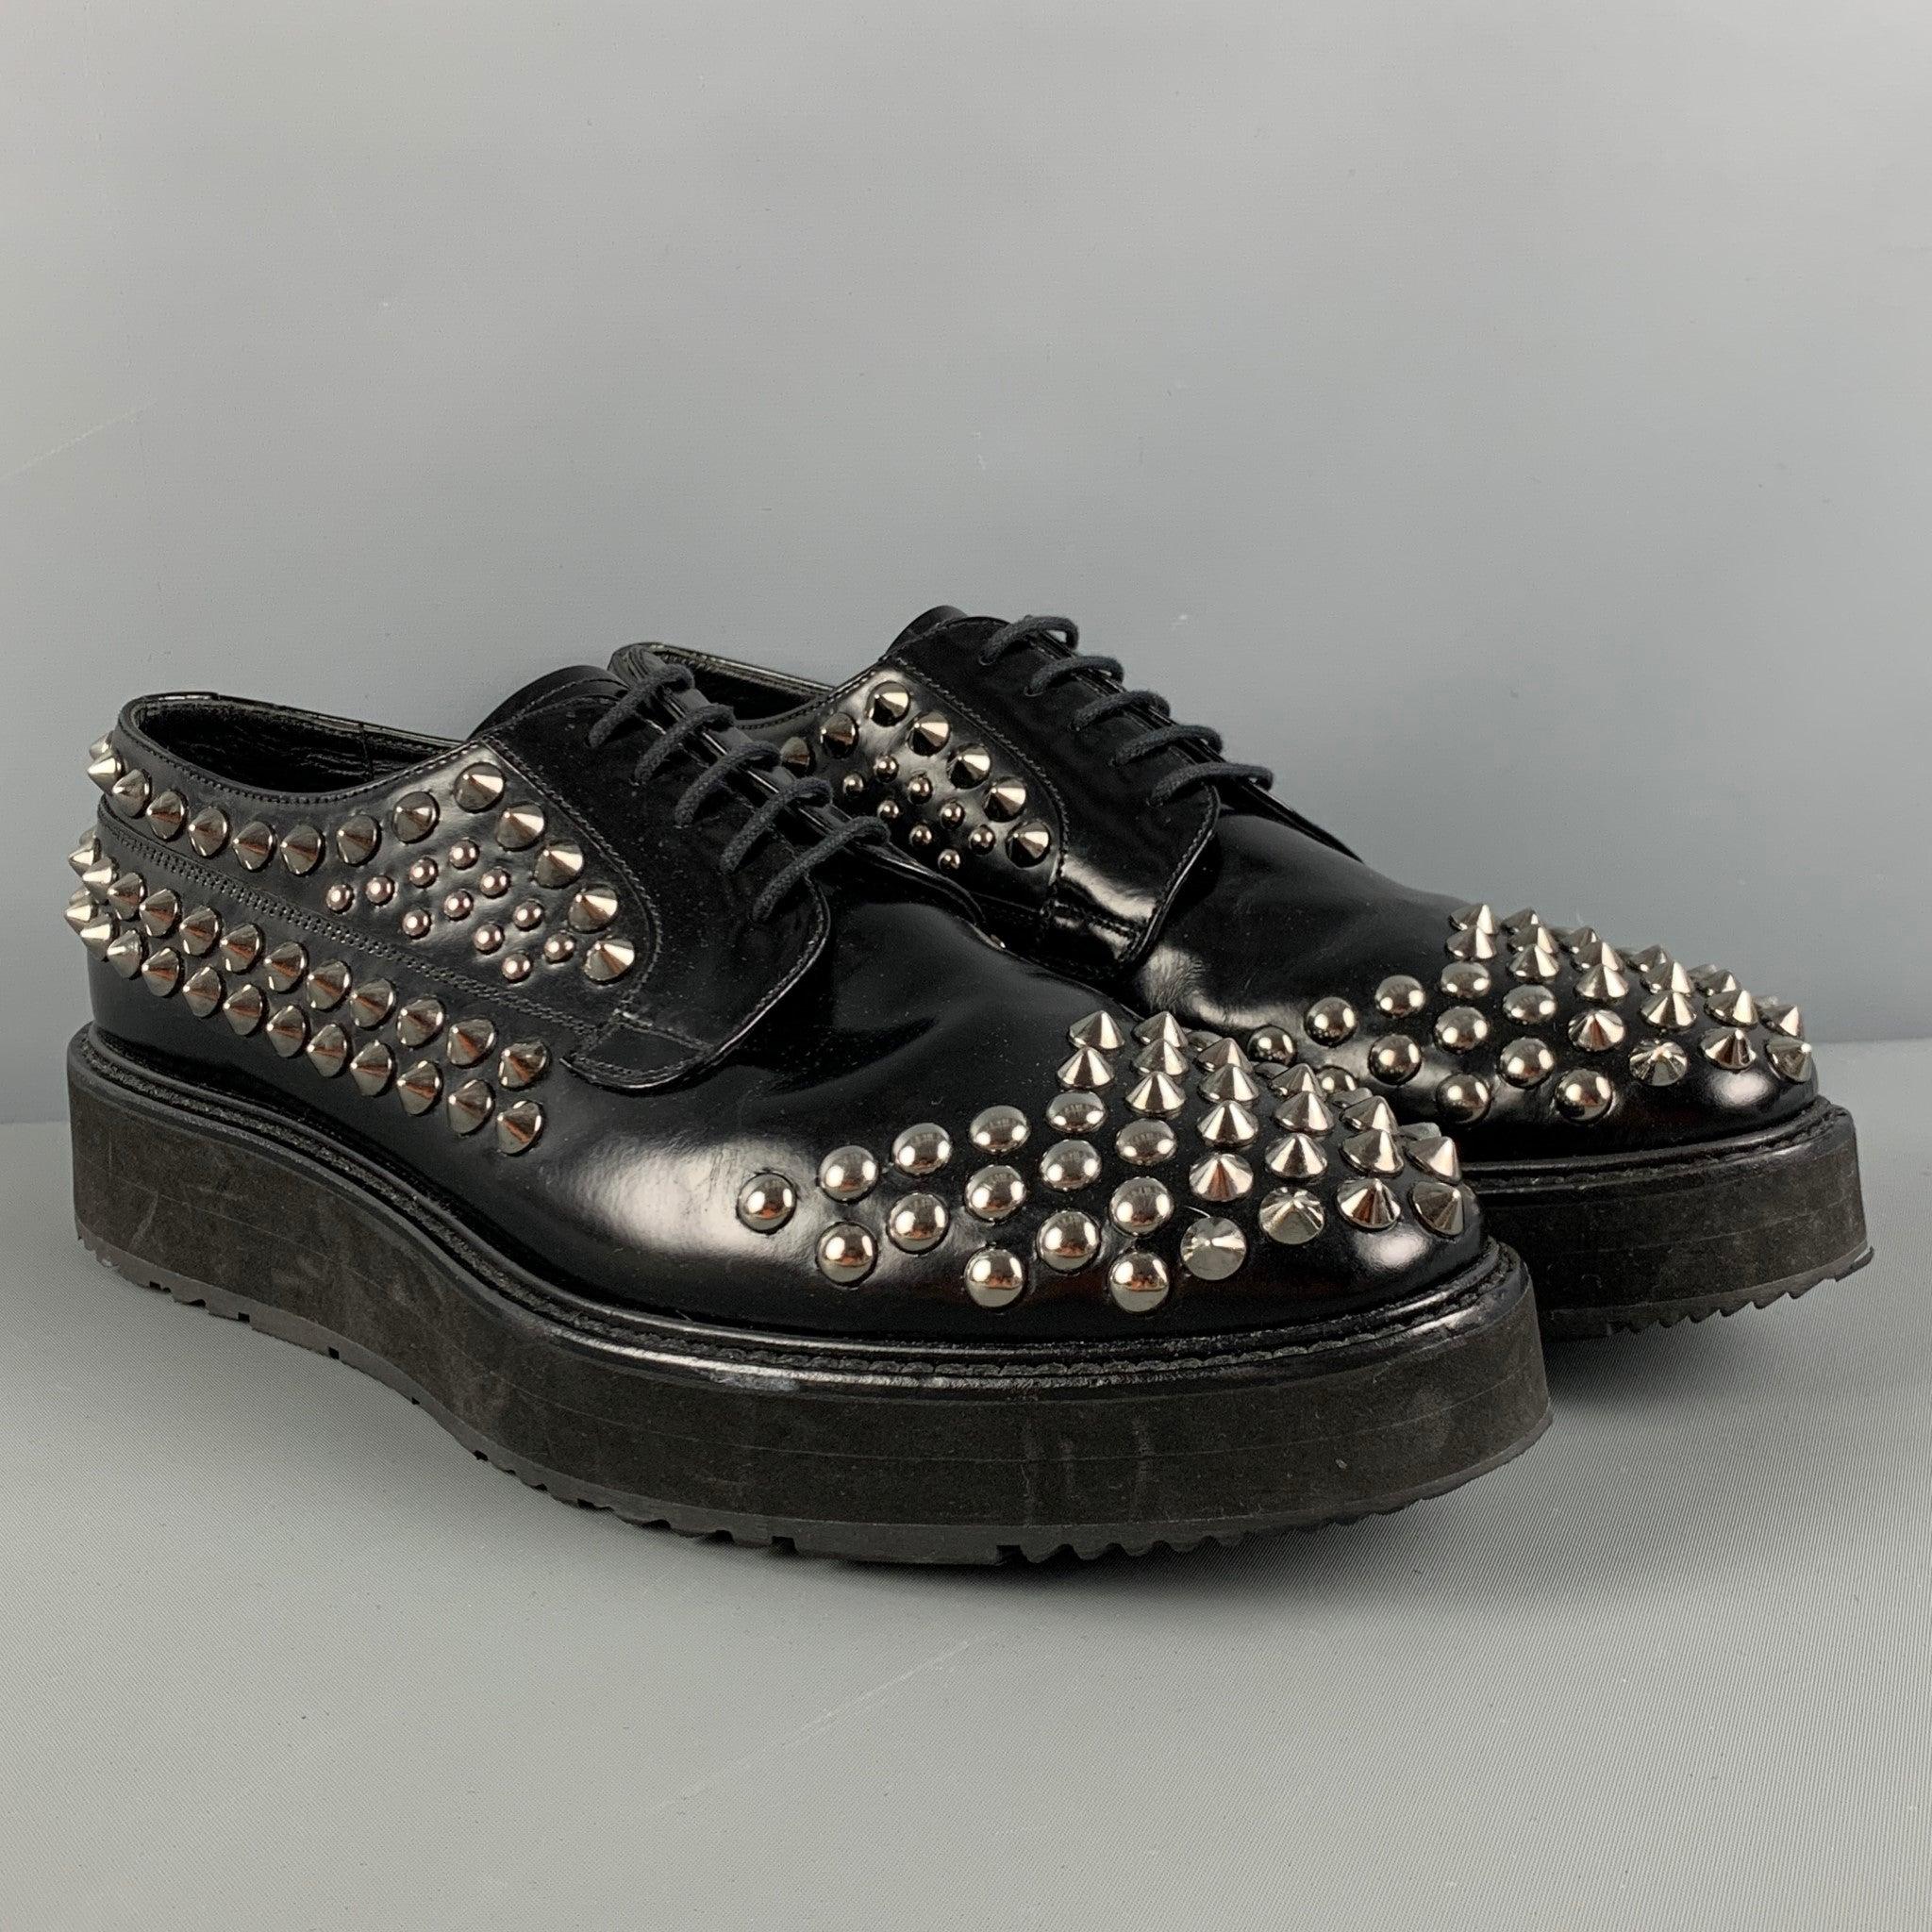 PRADA shoes comes in a black leather featuring a studded design throughout, square toe, rubber sole, and a lace up closure. Made in Italy.Very Good
Pre-Owned Condition. 

Marked:   9 2EG 080 8Outsole: 12.5 inches  x 4.25 inches 
  
  
 
Reference: